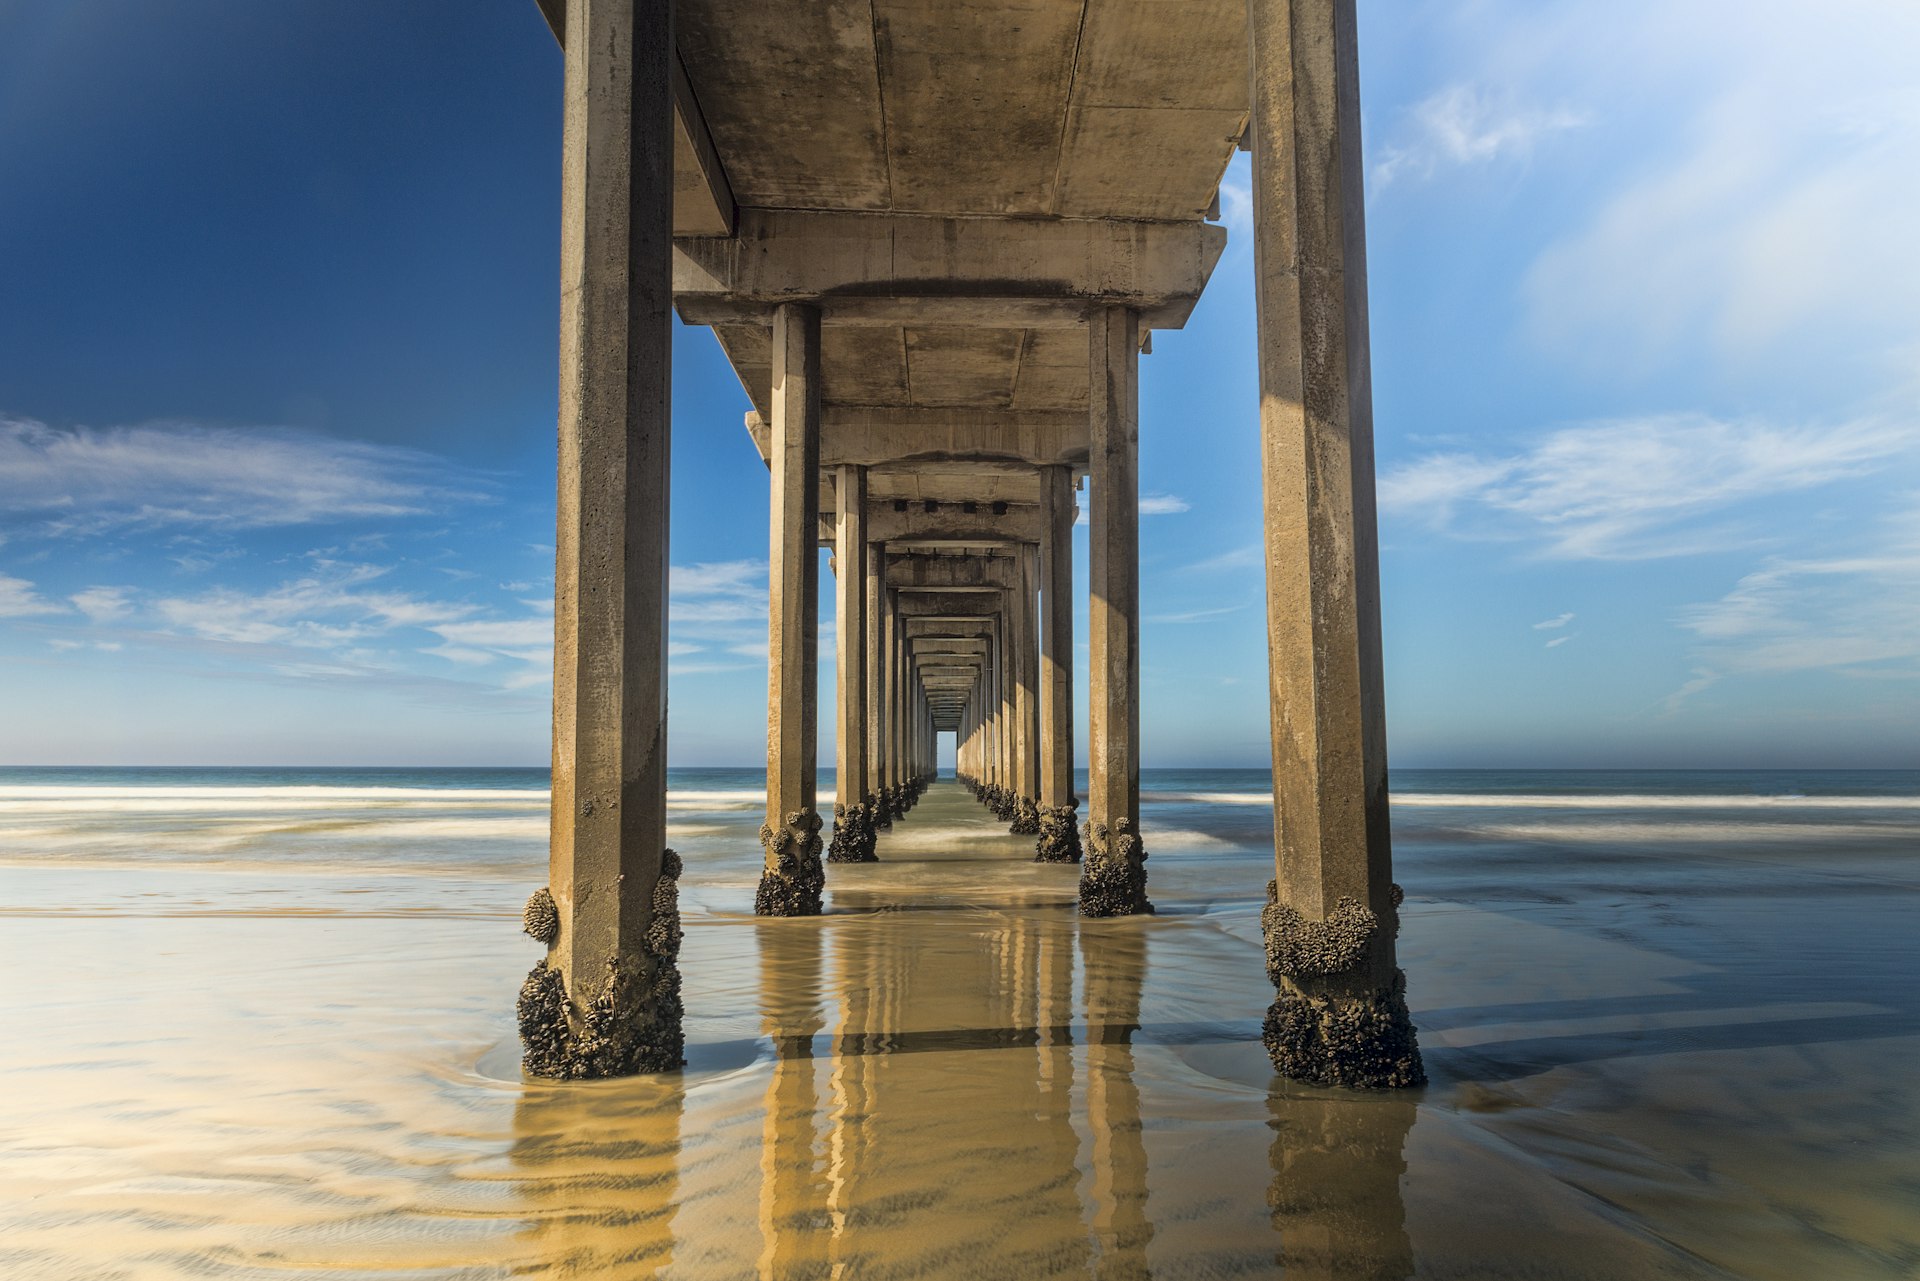 Looking out through the legs of Scripps Pier in La Jolla, California with the tide out